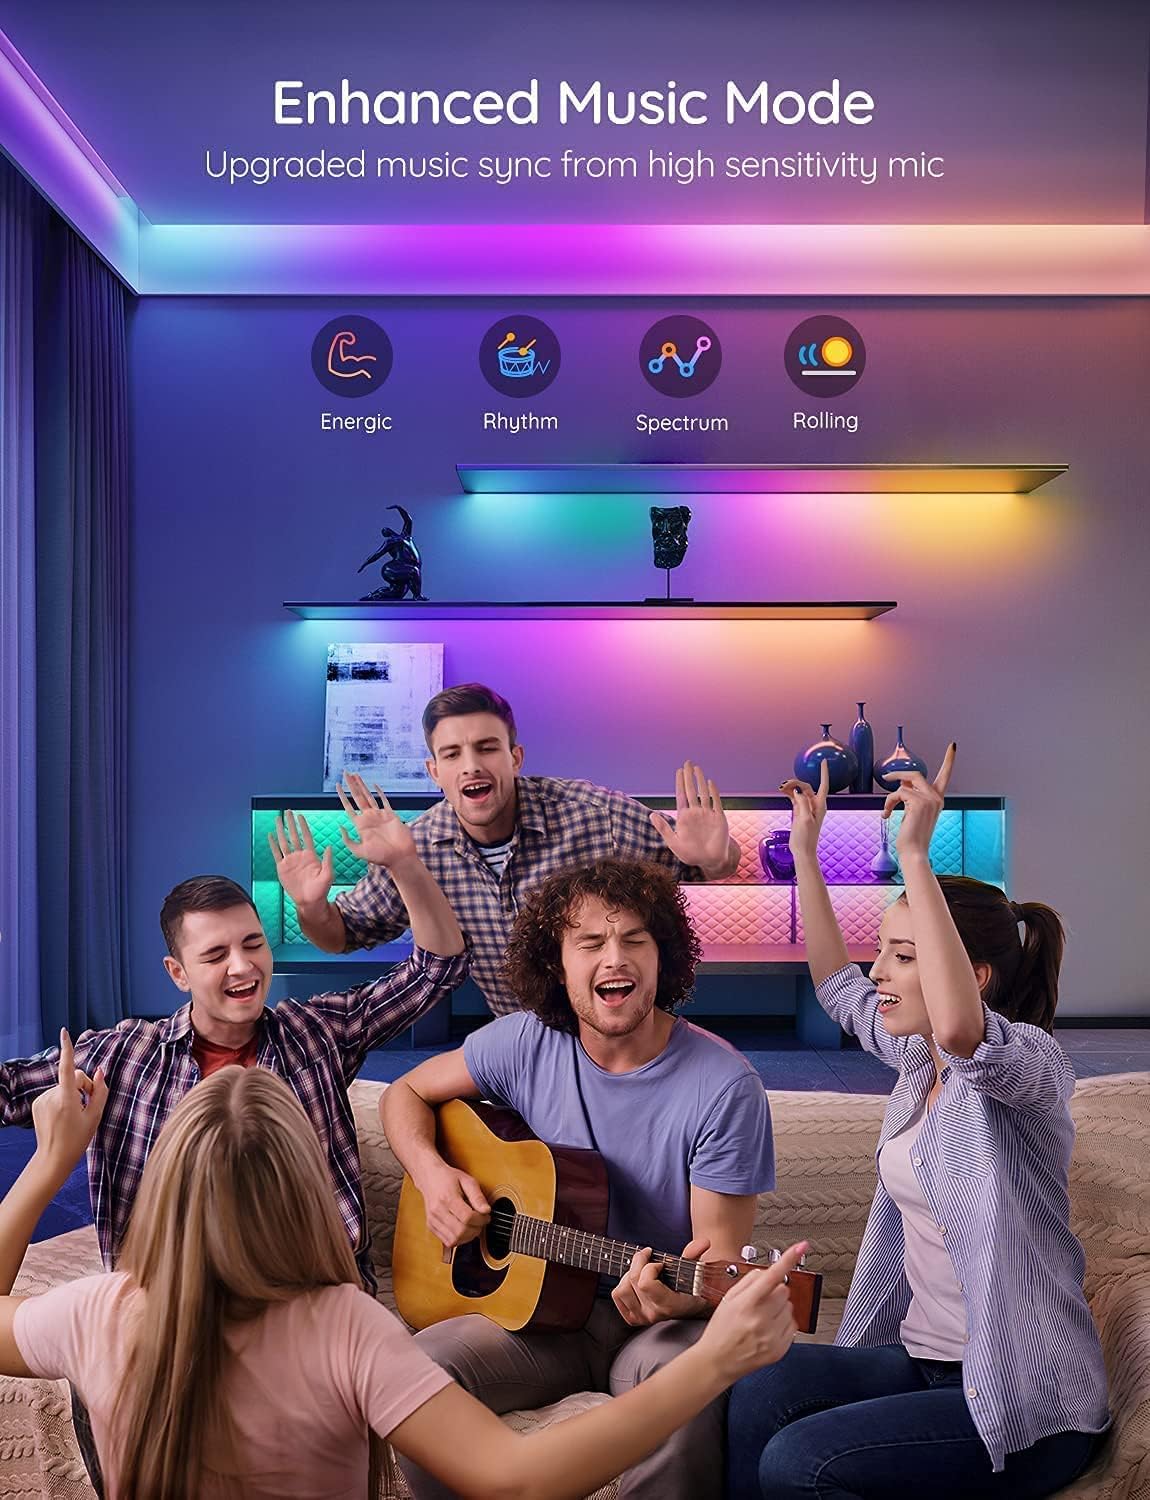 LED-Light-Strip-Led-Strip-Lights-5M-Smart-Light-Strips-with-Alexa-and-Google-Home-App-Control-Remote-16-Million-Colors-RGB-Led-Lights-for-Bedroom-Home-Kitchen-Party-45